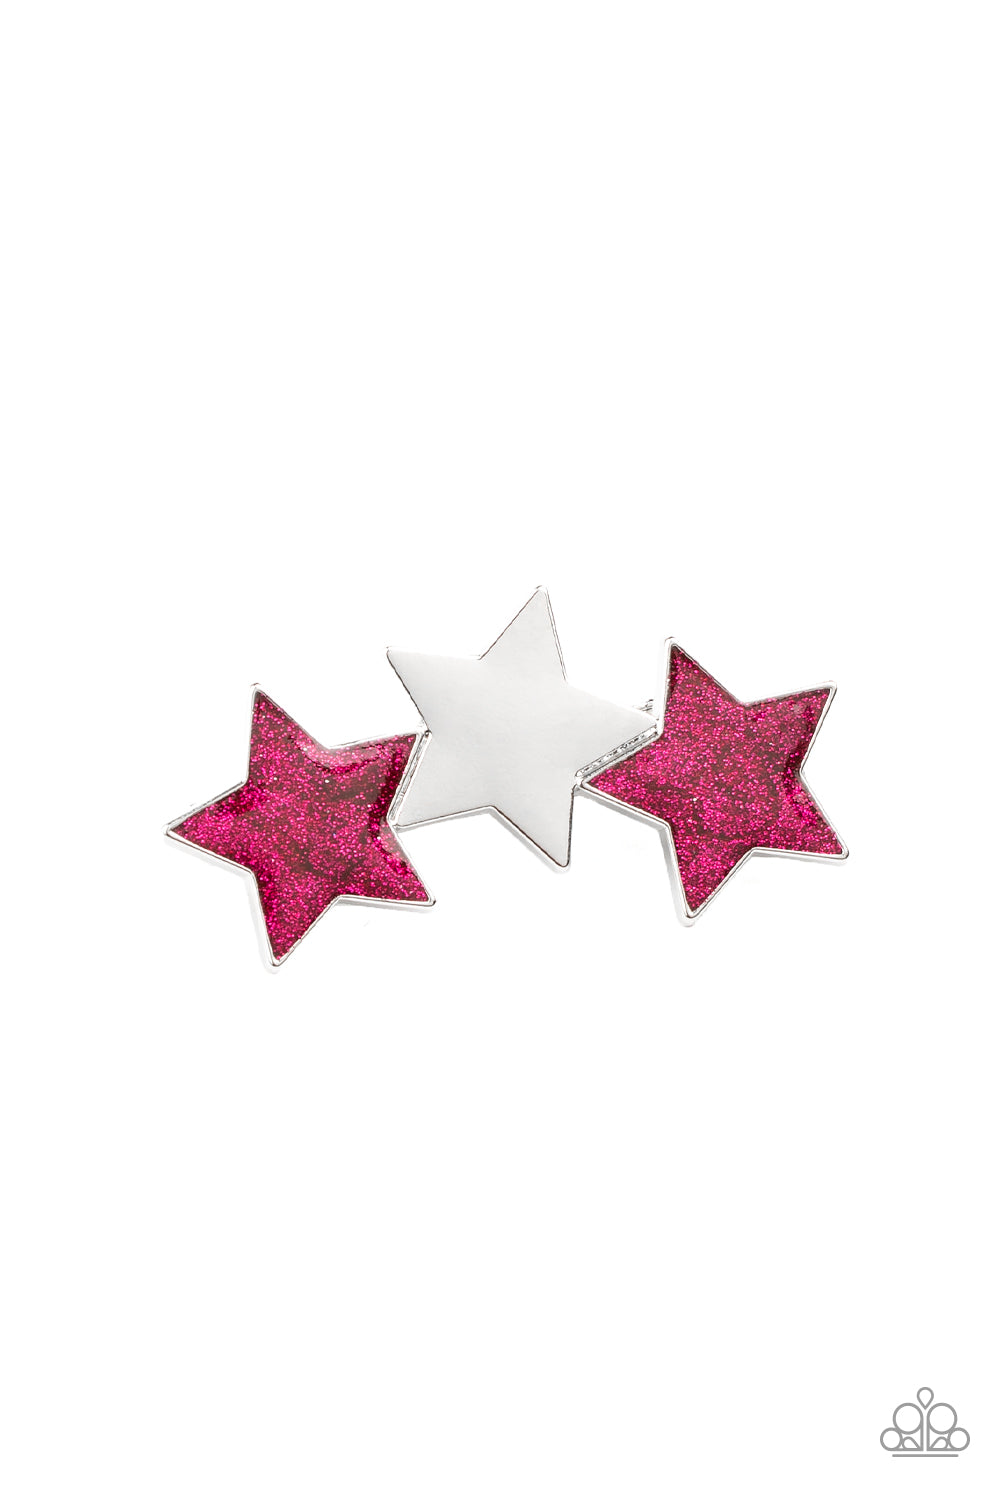 Dont Get Me STAR-ted! Pink Hair Clip - Paparazzi Accessories